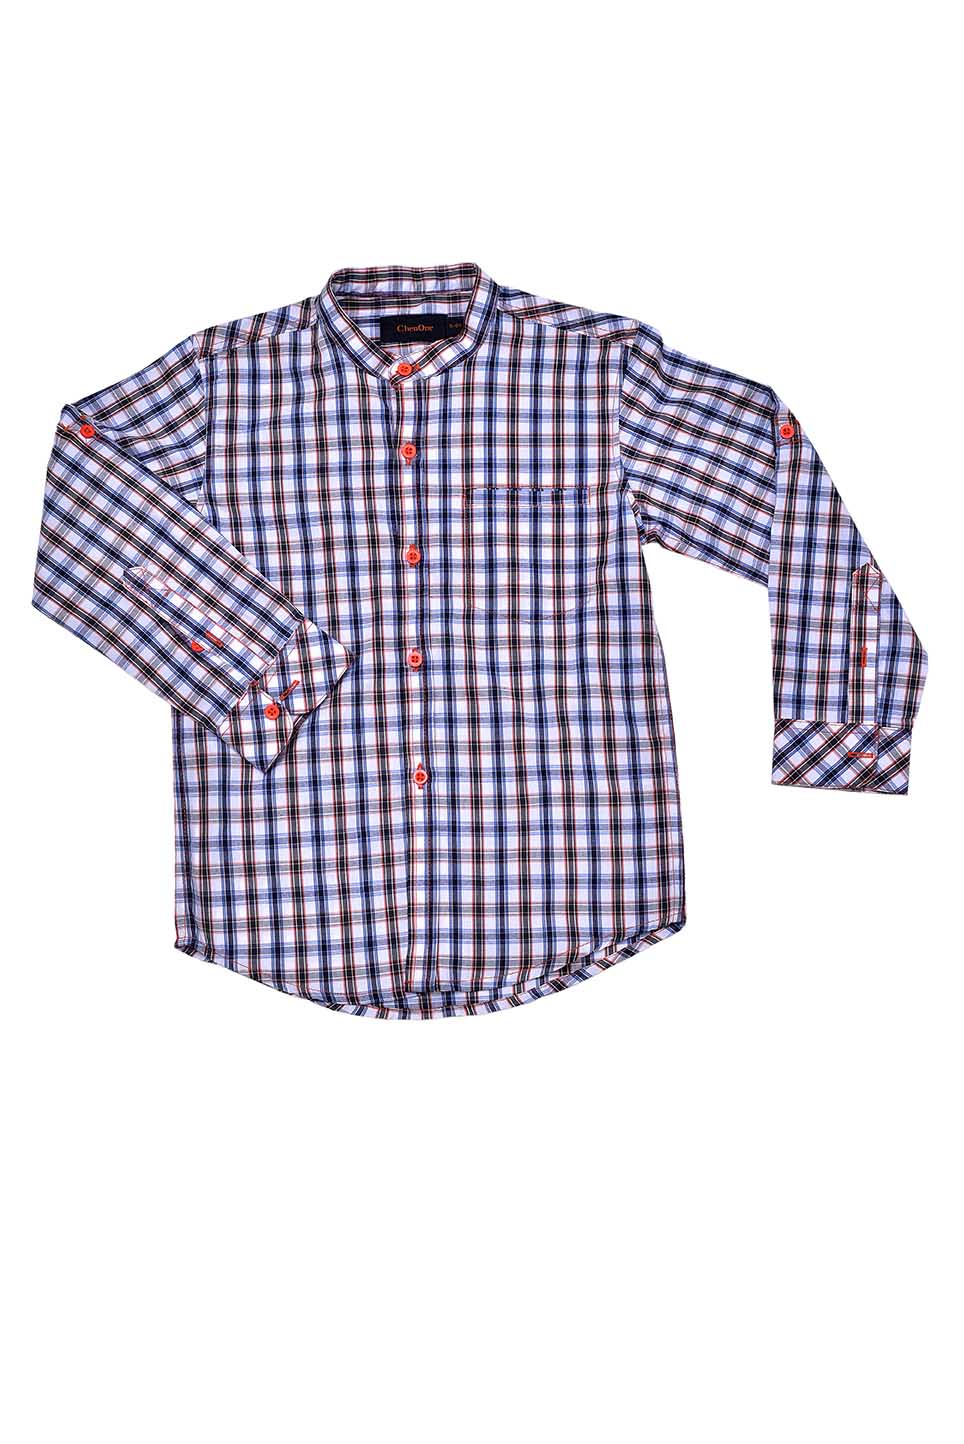 SHIRT CASUAL RED BLUE CHECK KDS-B-13047